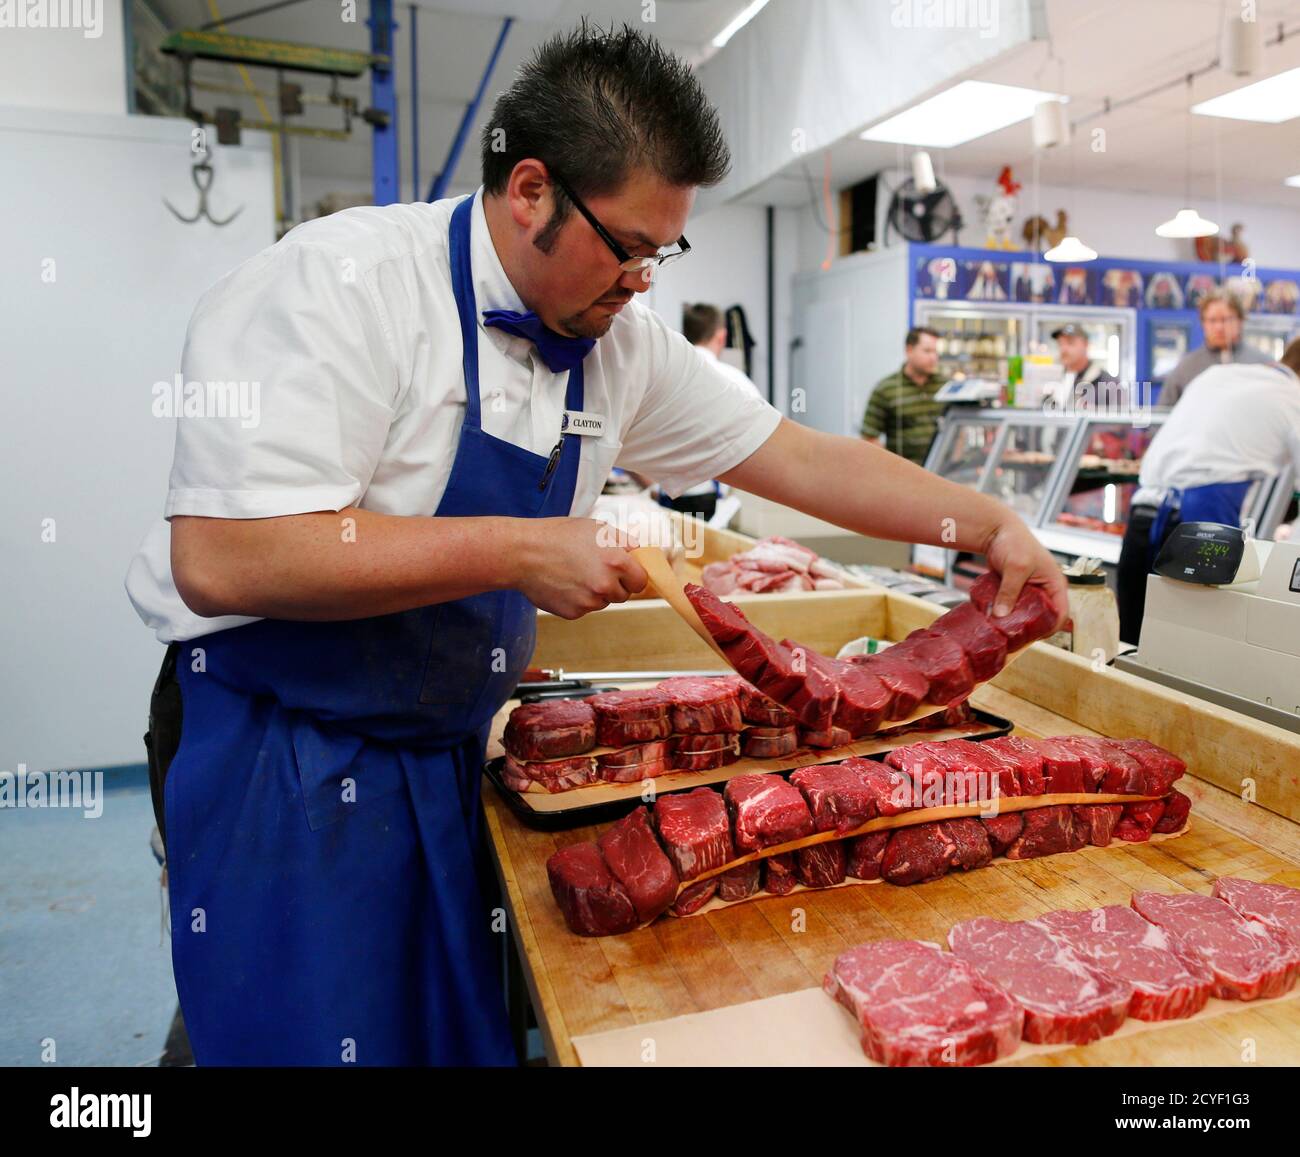 clayton colliou a butcher at bon ton meat market works with choice cuts of alberta beef in calgary alberta october 3 2012 bon ton stated it was not effected by the recent ecoli outbreak as they get their meat from select smaller producers e coli a strain of which can cause sickness or even death is widely present in meat processing plants and regulators require packers to control the bacteria within certain levels ecoli can be killed by thoroughly cooking meat reuterstodd korol canada tags food health 2CYF1G3